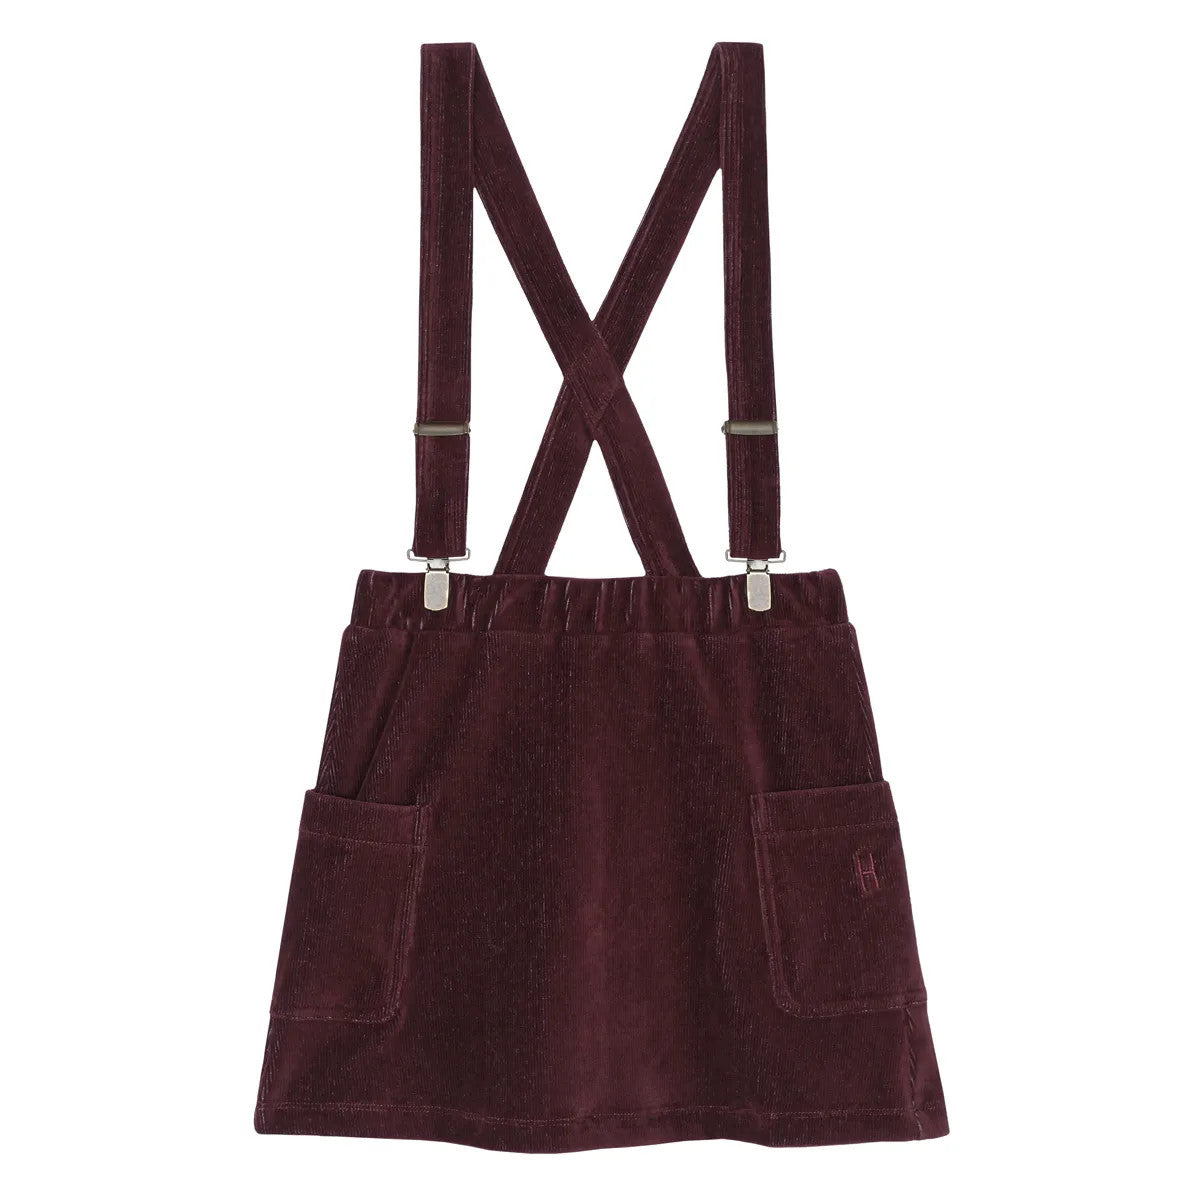 Little Hedonist comfortable, yet fancy, wine-colored dress with suspenders, to be worn for any occasion. Organic kids fashion.